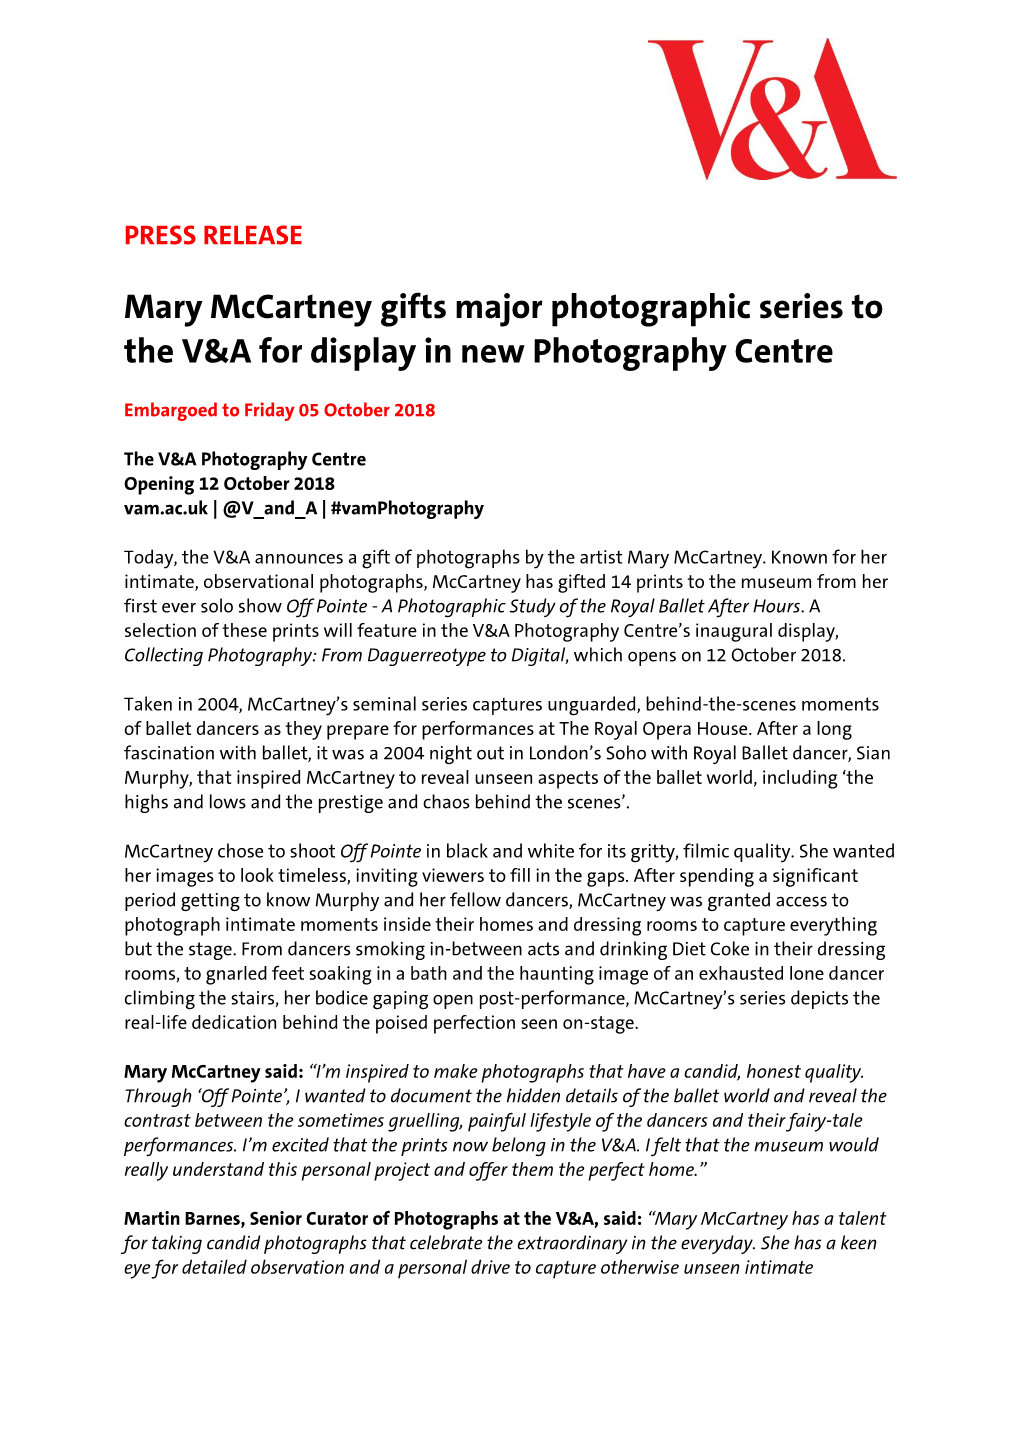 Mary Mccartney Gifts Major Photographic Series to the V&A For